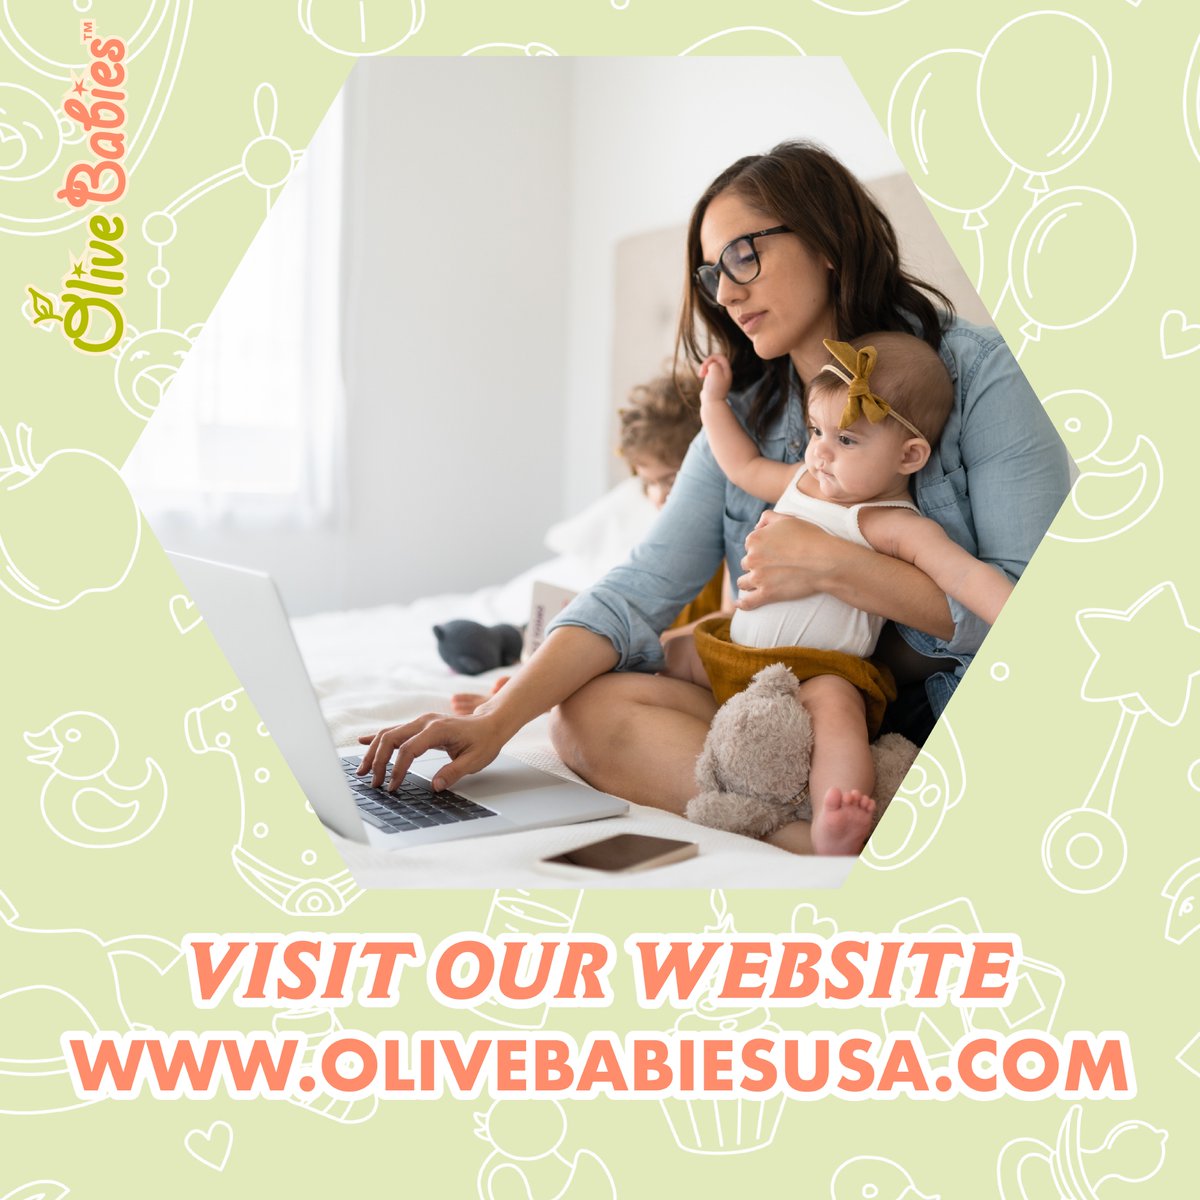 Your baby deserves the best, and we've got it all! 🌟 Click the link in our bio to explore our website and discover the finest baby care products crafted with love and expertise. 
#OliveBabies #KidsHair #KidsHairProducts #BabyOil #ParabenFree #BabyProducts #CurlyBaby #KidsLine